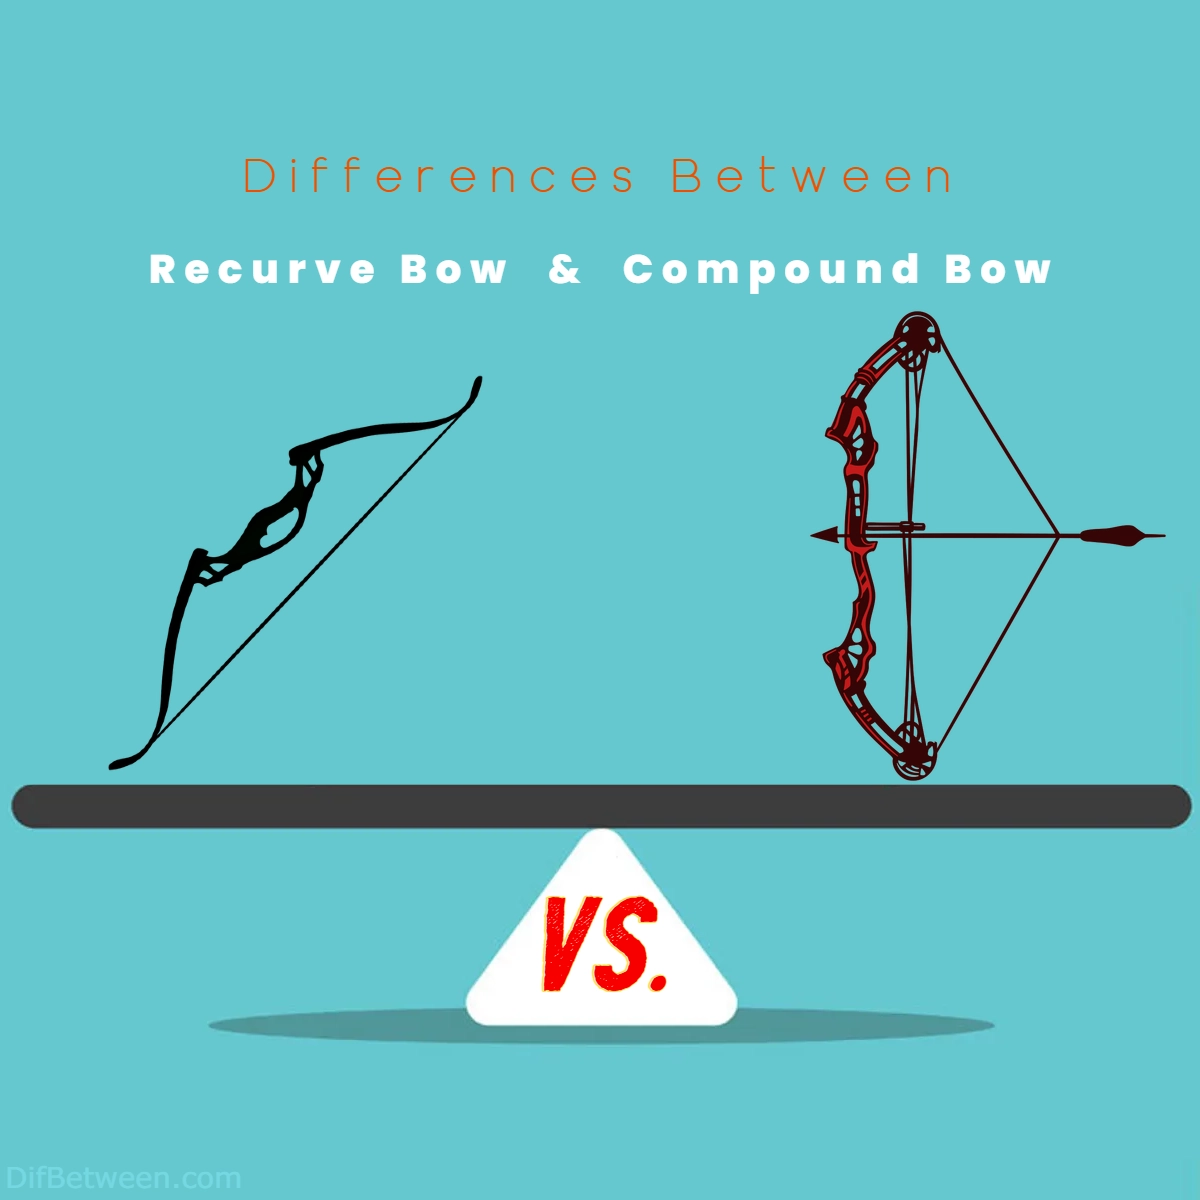 Difference Between Recurve and Compound Bow